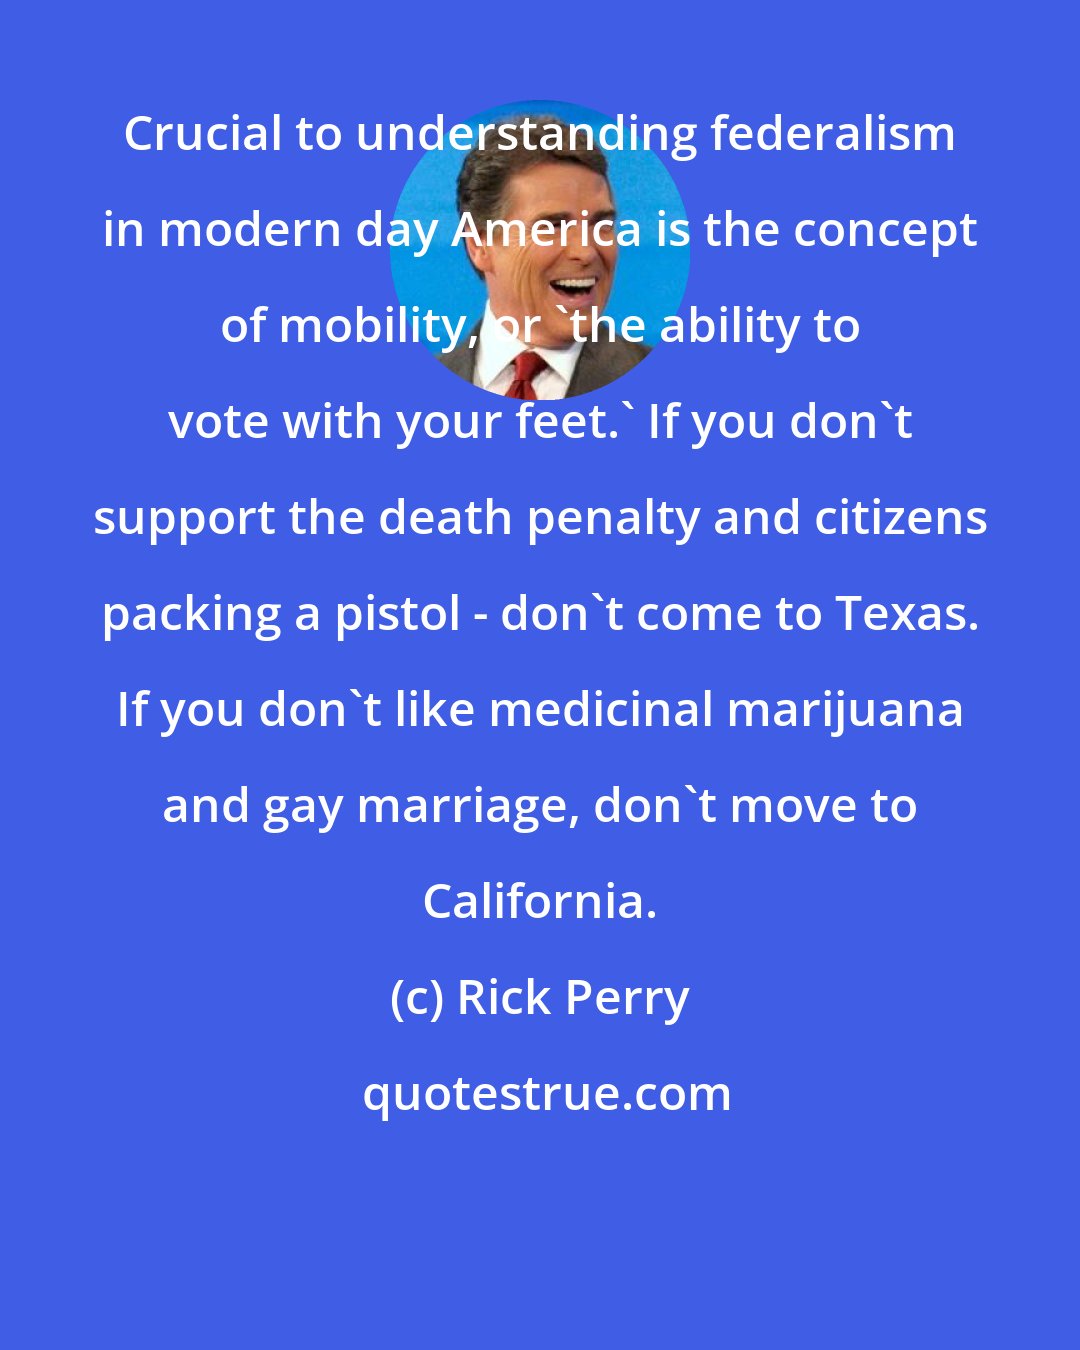 Rick Perry: Crucial to understanding federalism in modern day America is the concept of mobility, or 'the ability to vote with your feet.' If you don't support the death penalty and citizens packing a pistol - don't come to Texas. If you don't like medicinal marijuana and gay marriage, don't move to California.